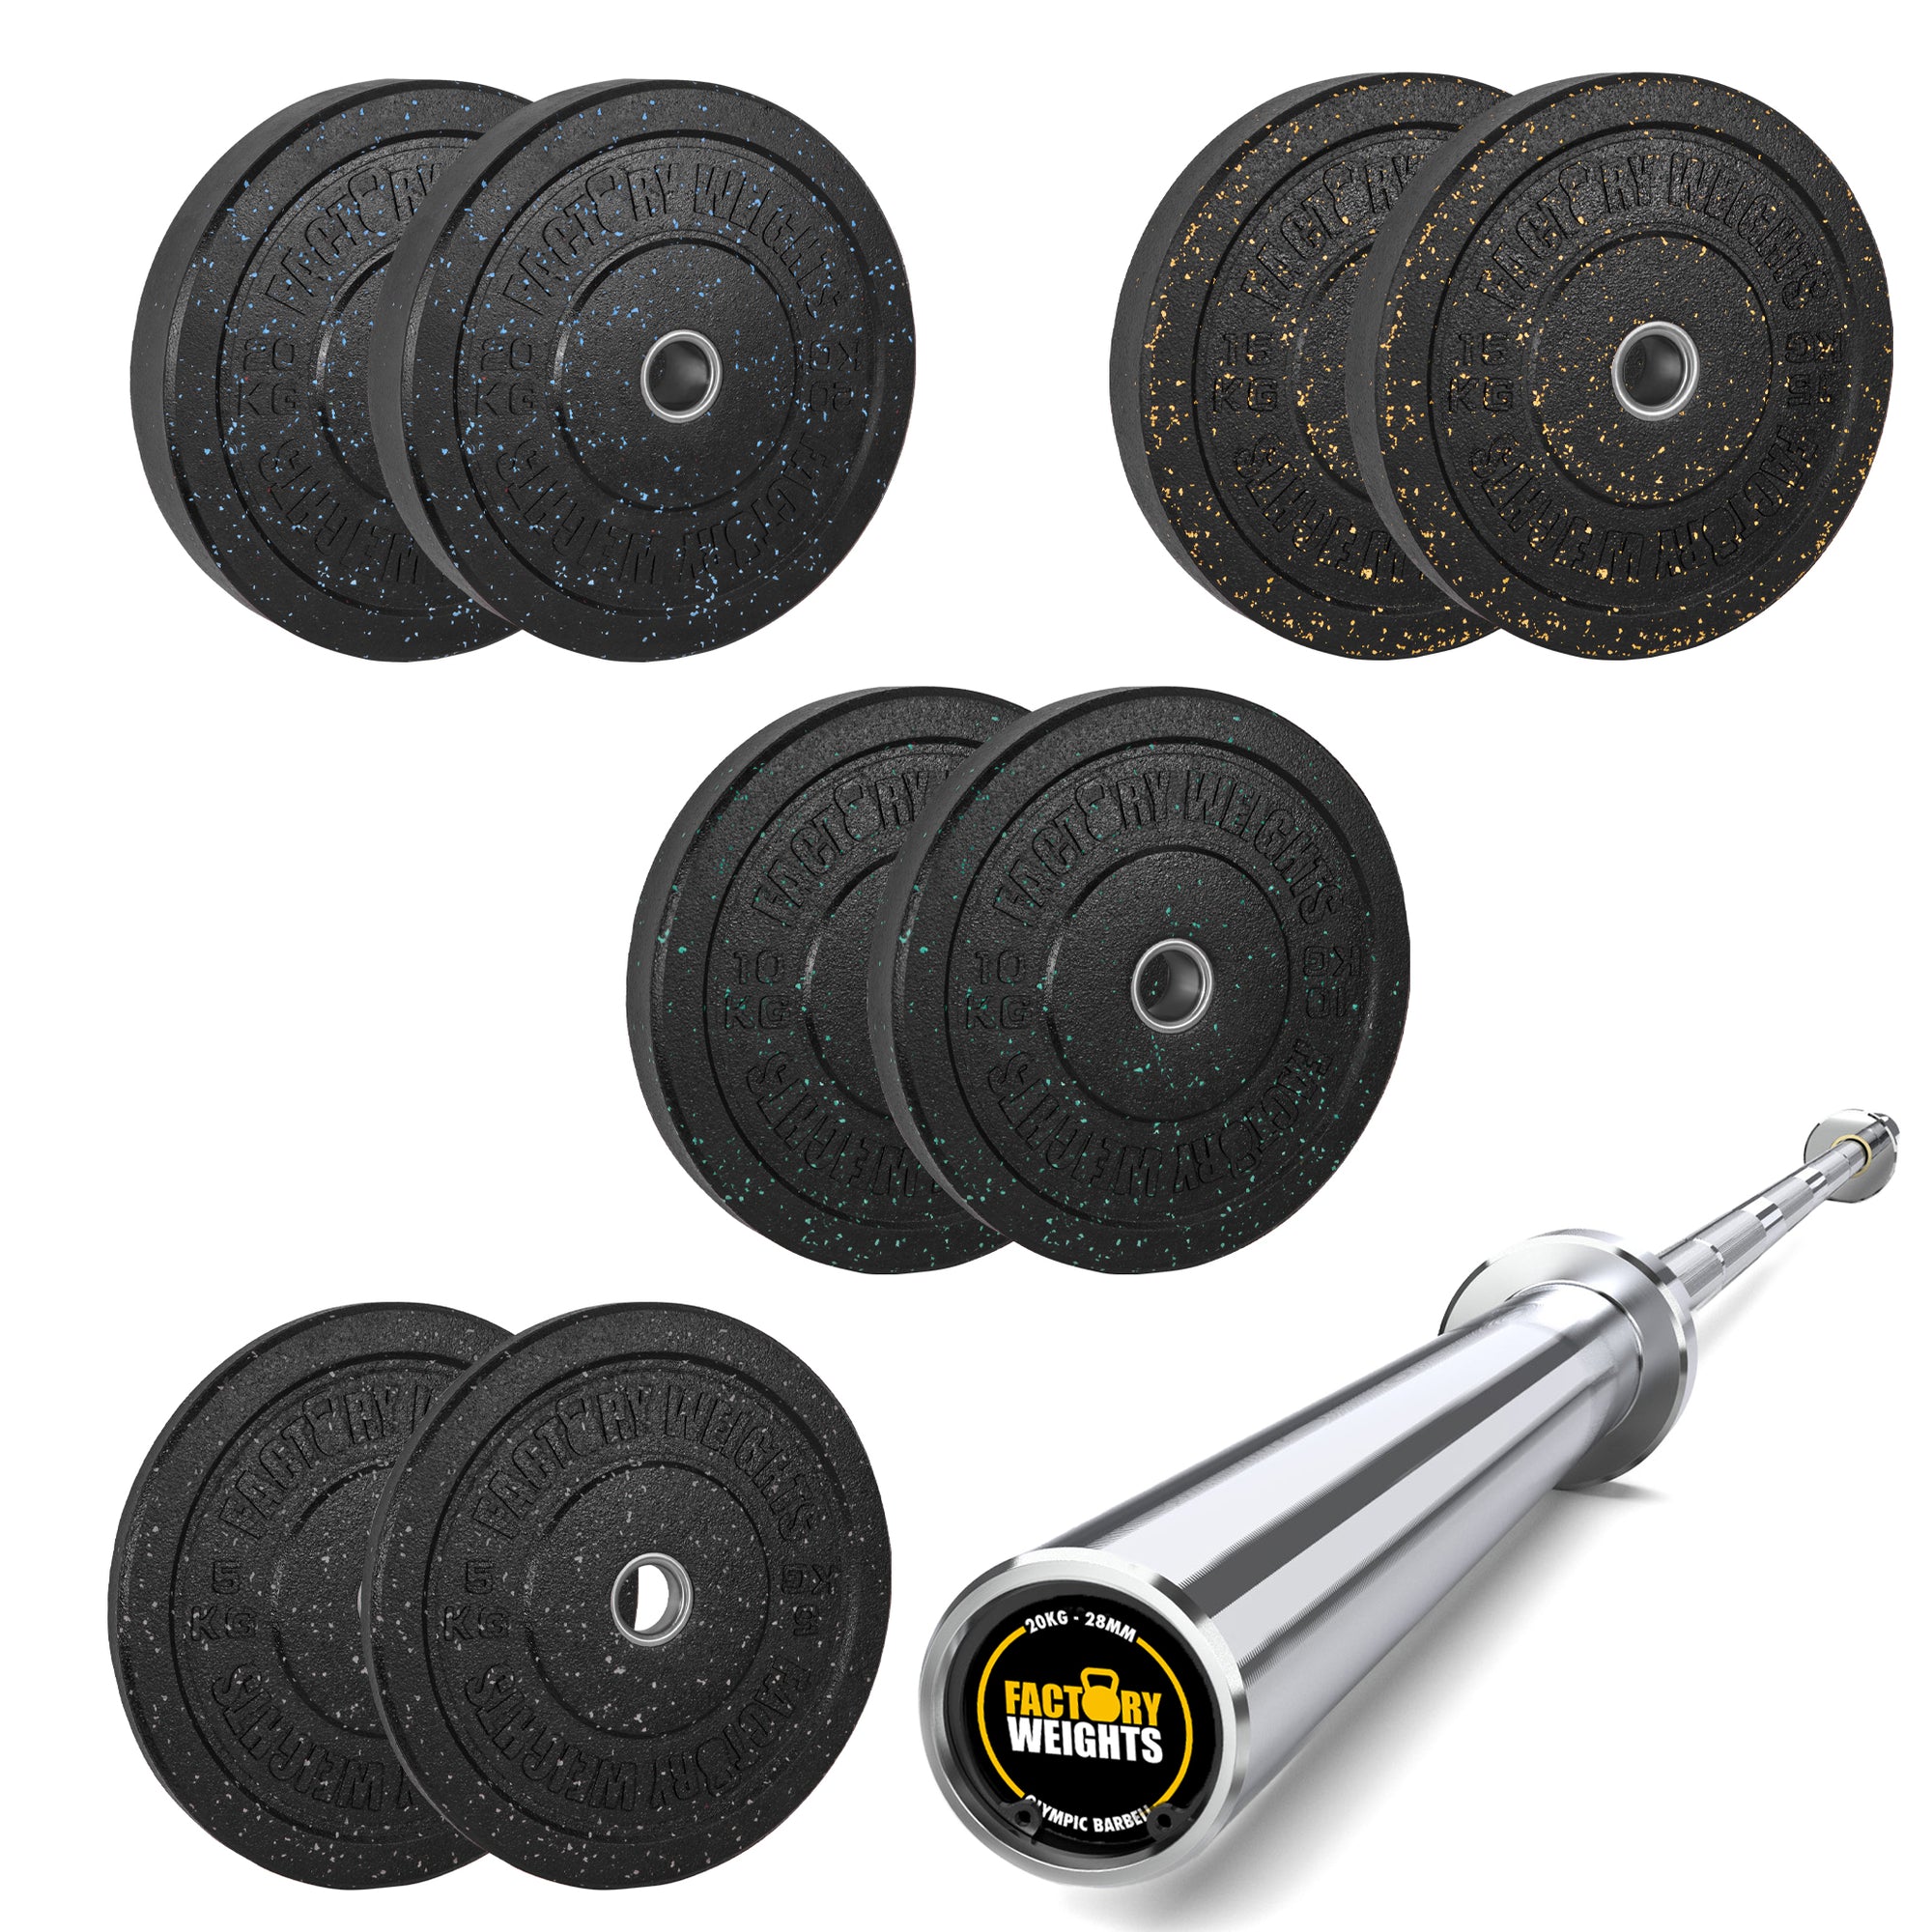 100kg Crumb Bumper Plate Set With 7ft Olympic Barbell